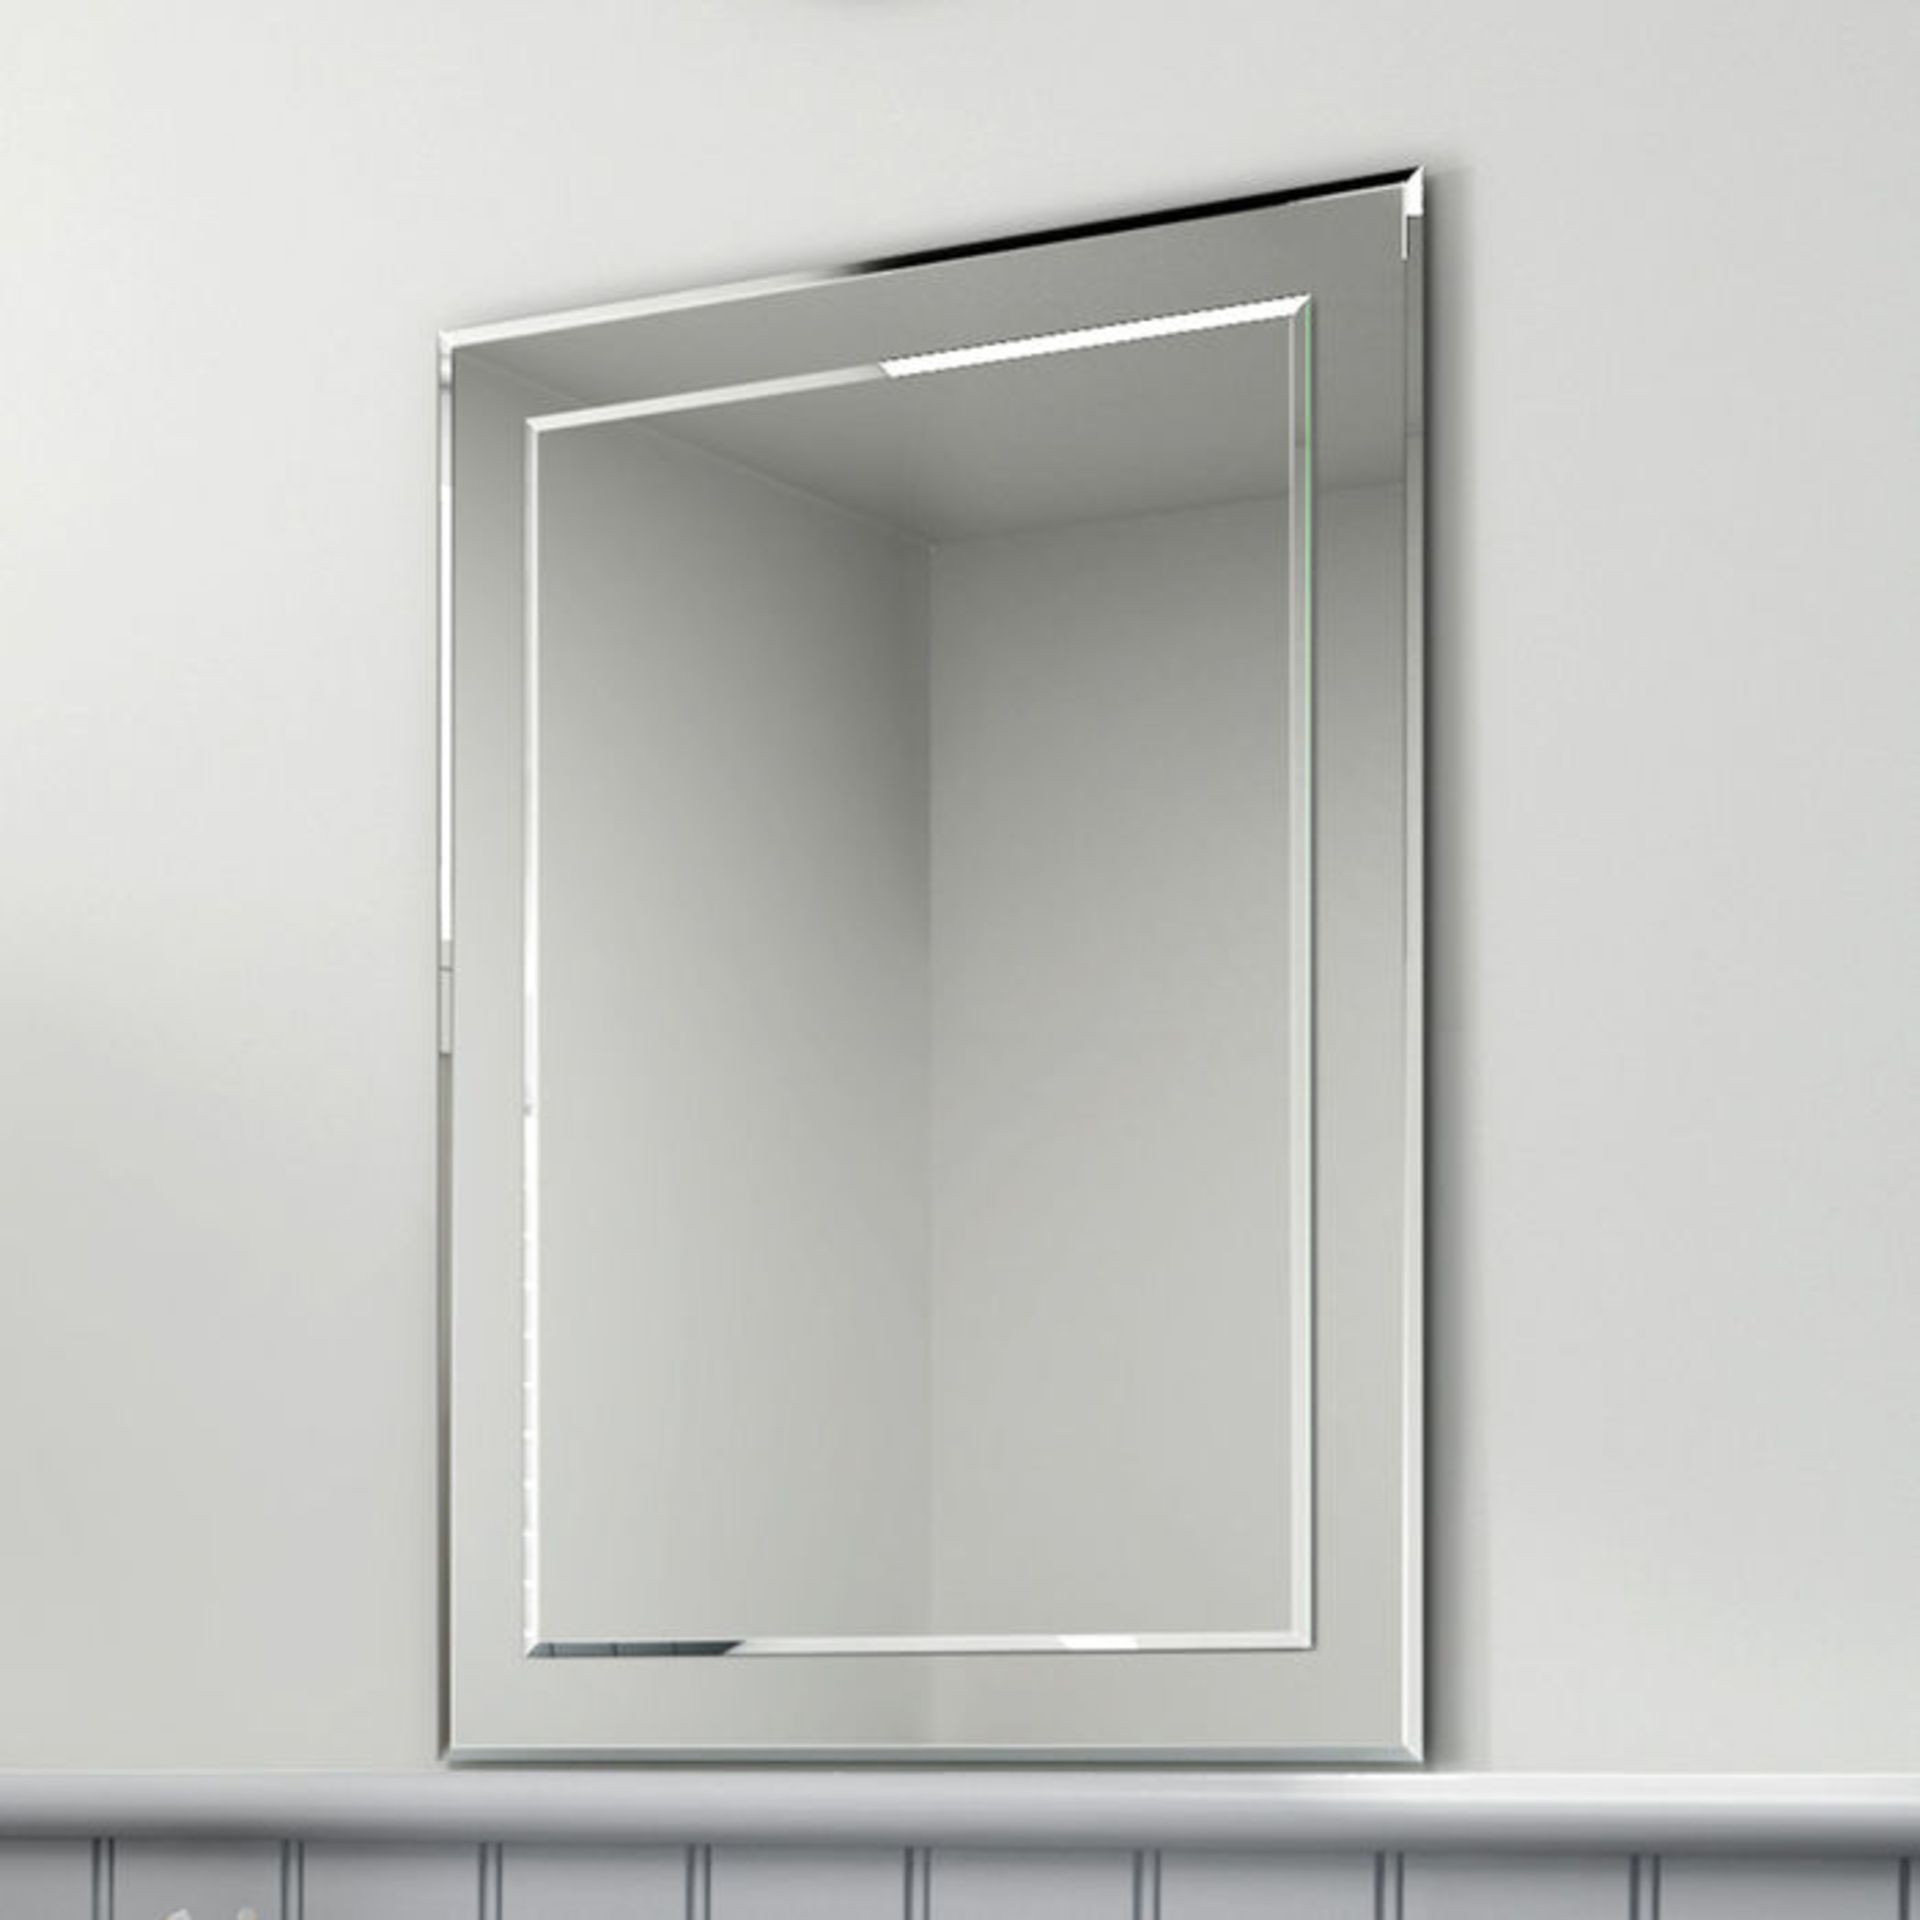 (PA88) 500x700mm Bevel Mirror. Smooth beveled edge for additional safety and style Supplied fully